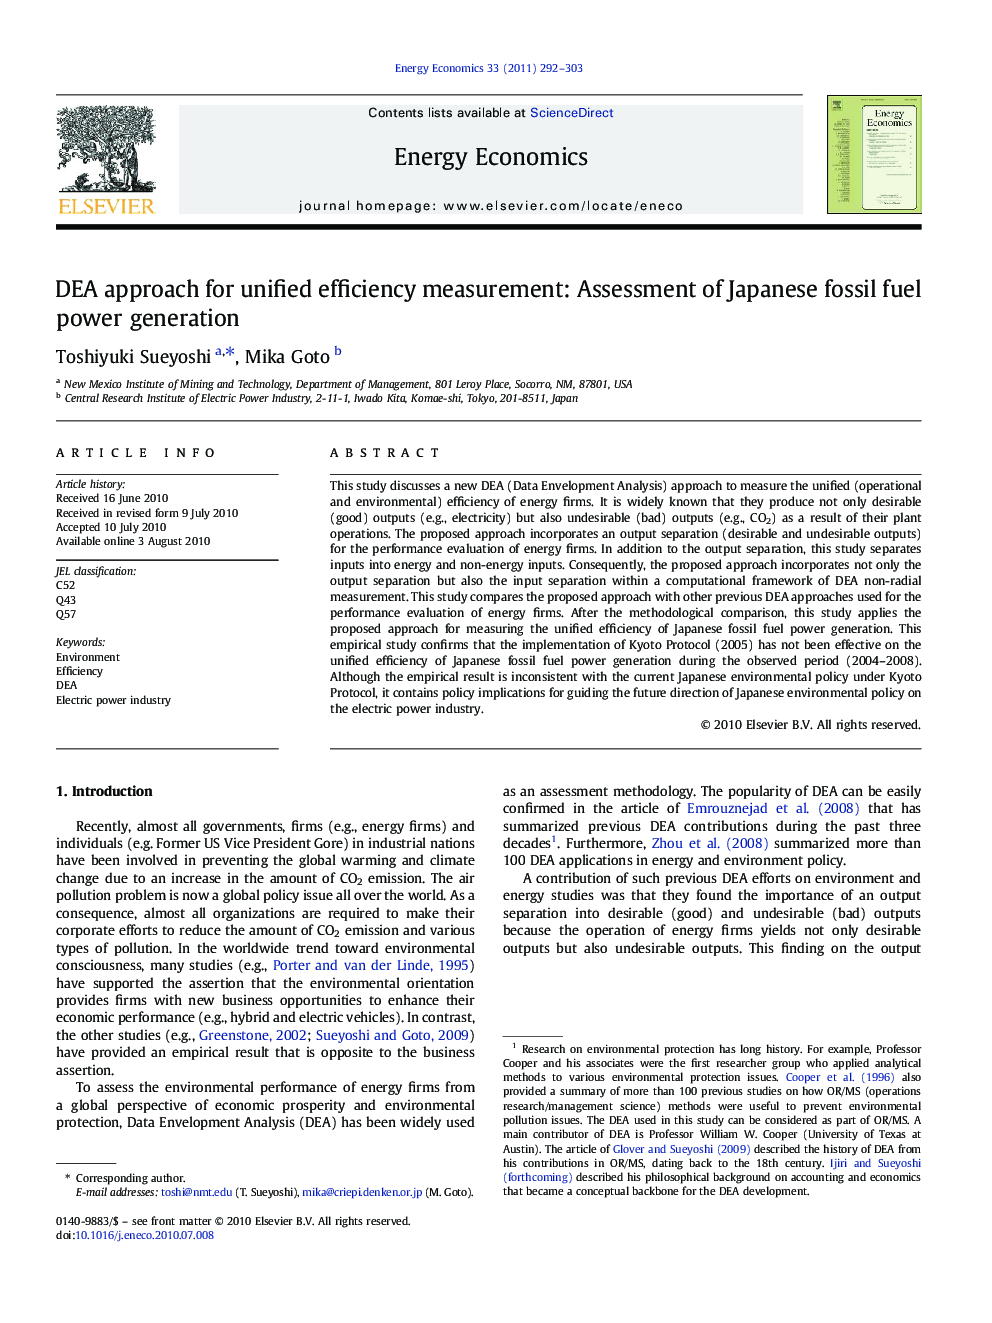 DEA approach for unified efficiency measurement: Assessment of Japanese fossil fuel power generation